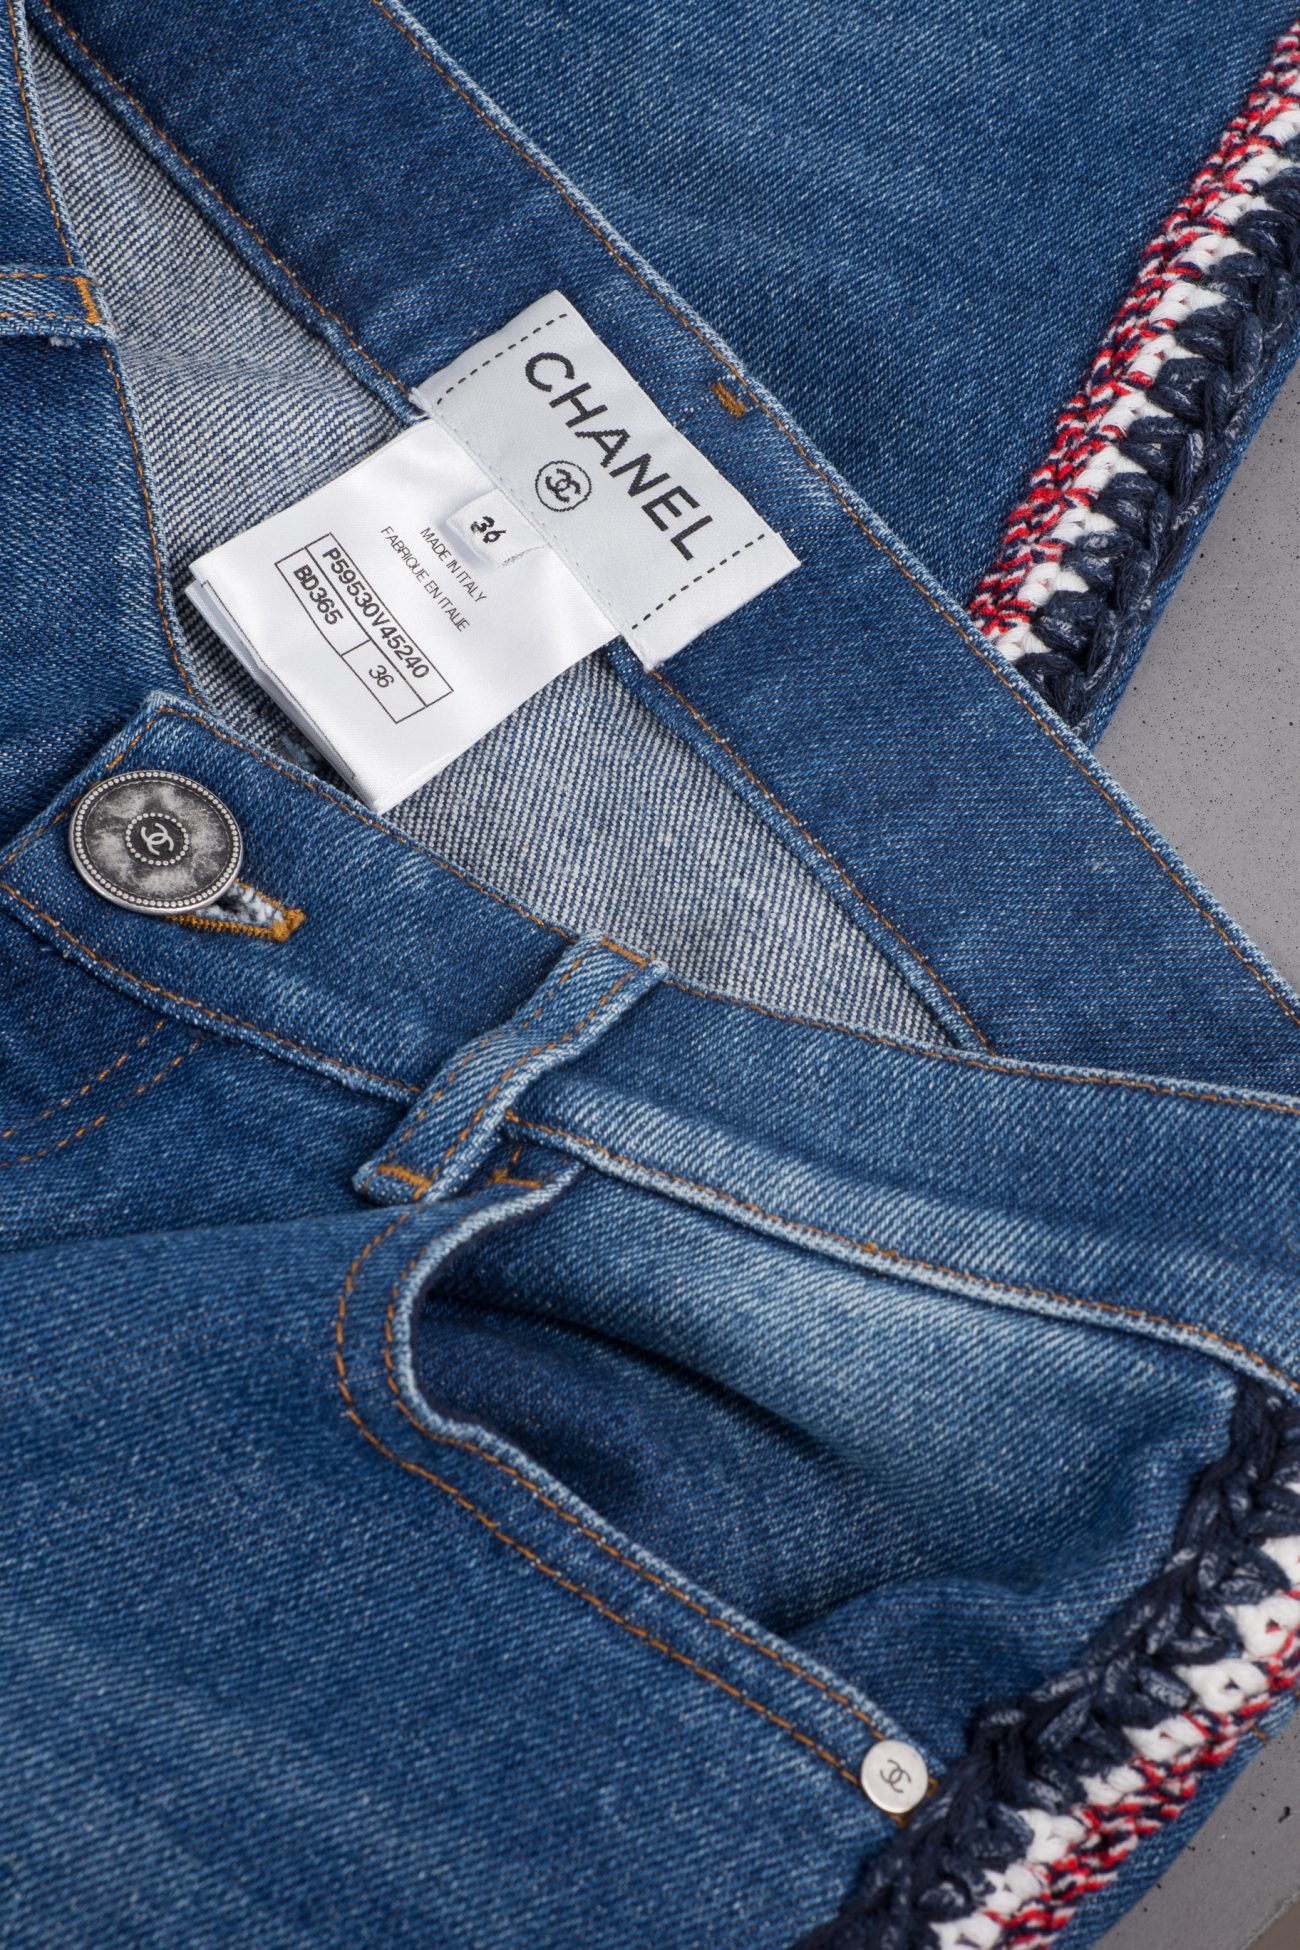 chanel jeans price